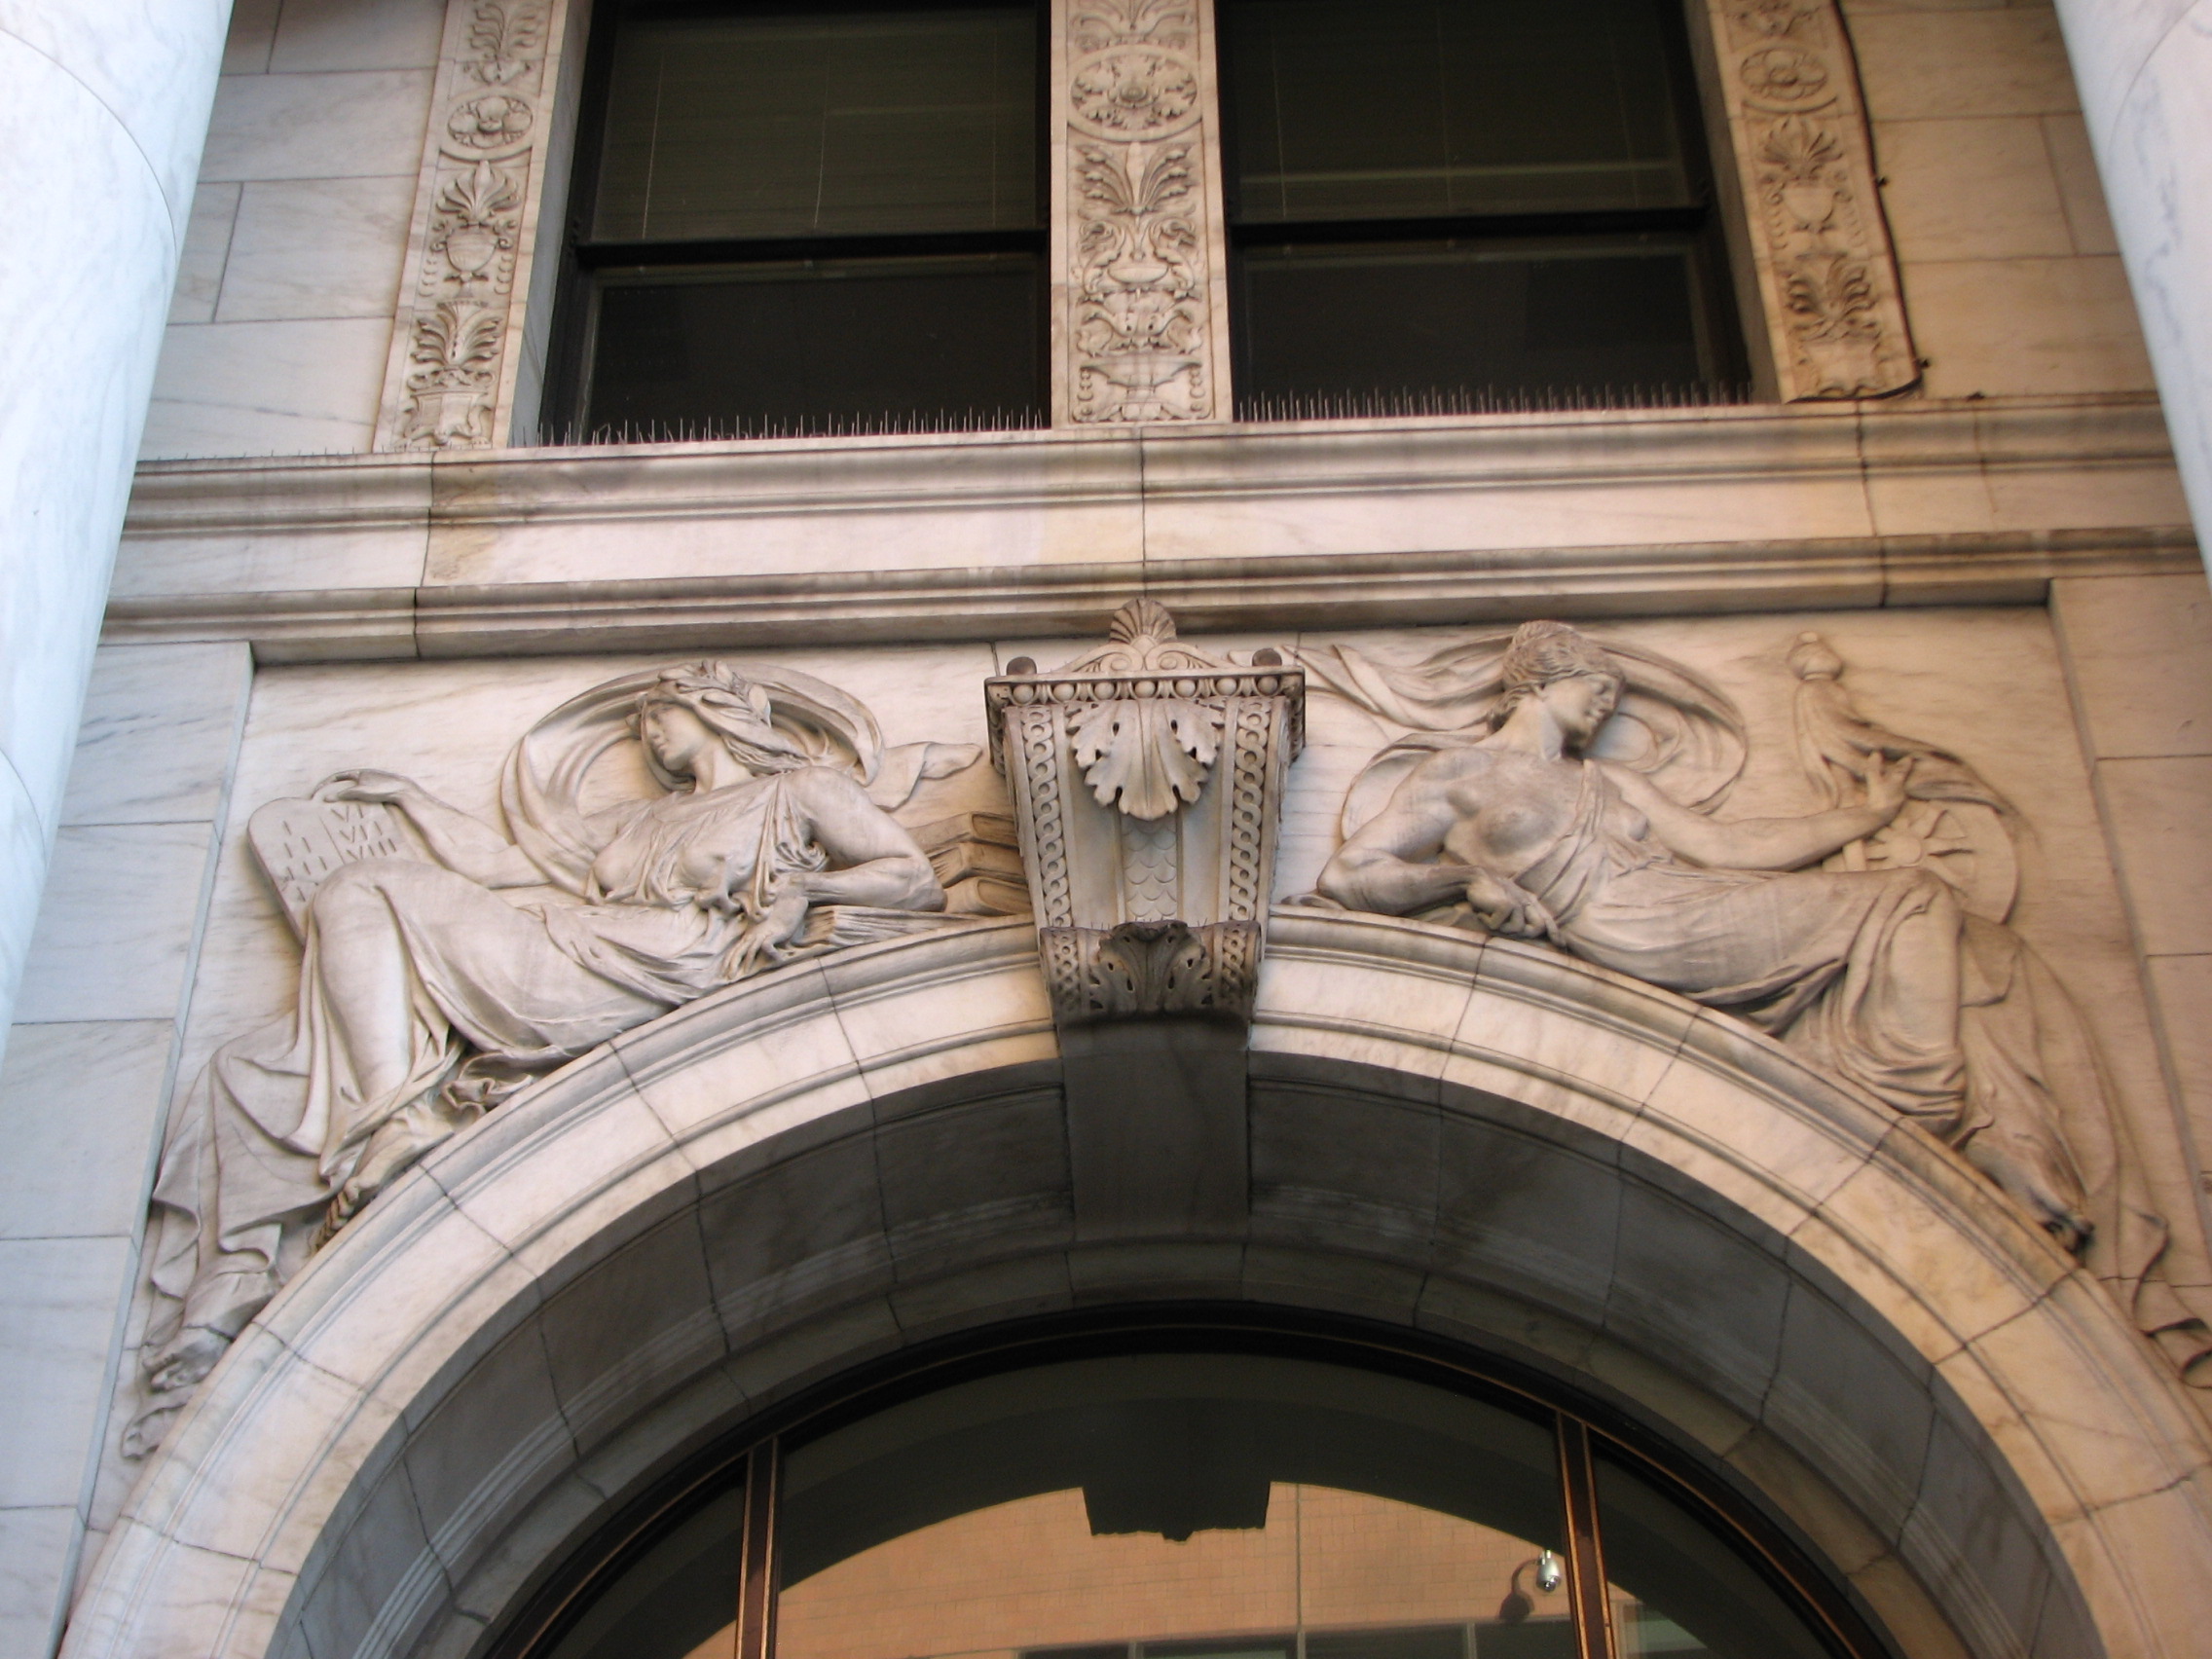 Marble carvings grace most of the entrances to the building